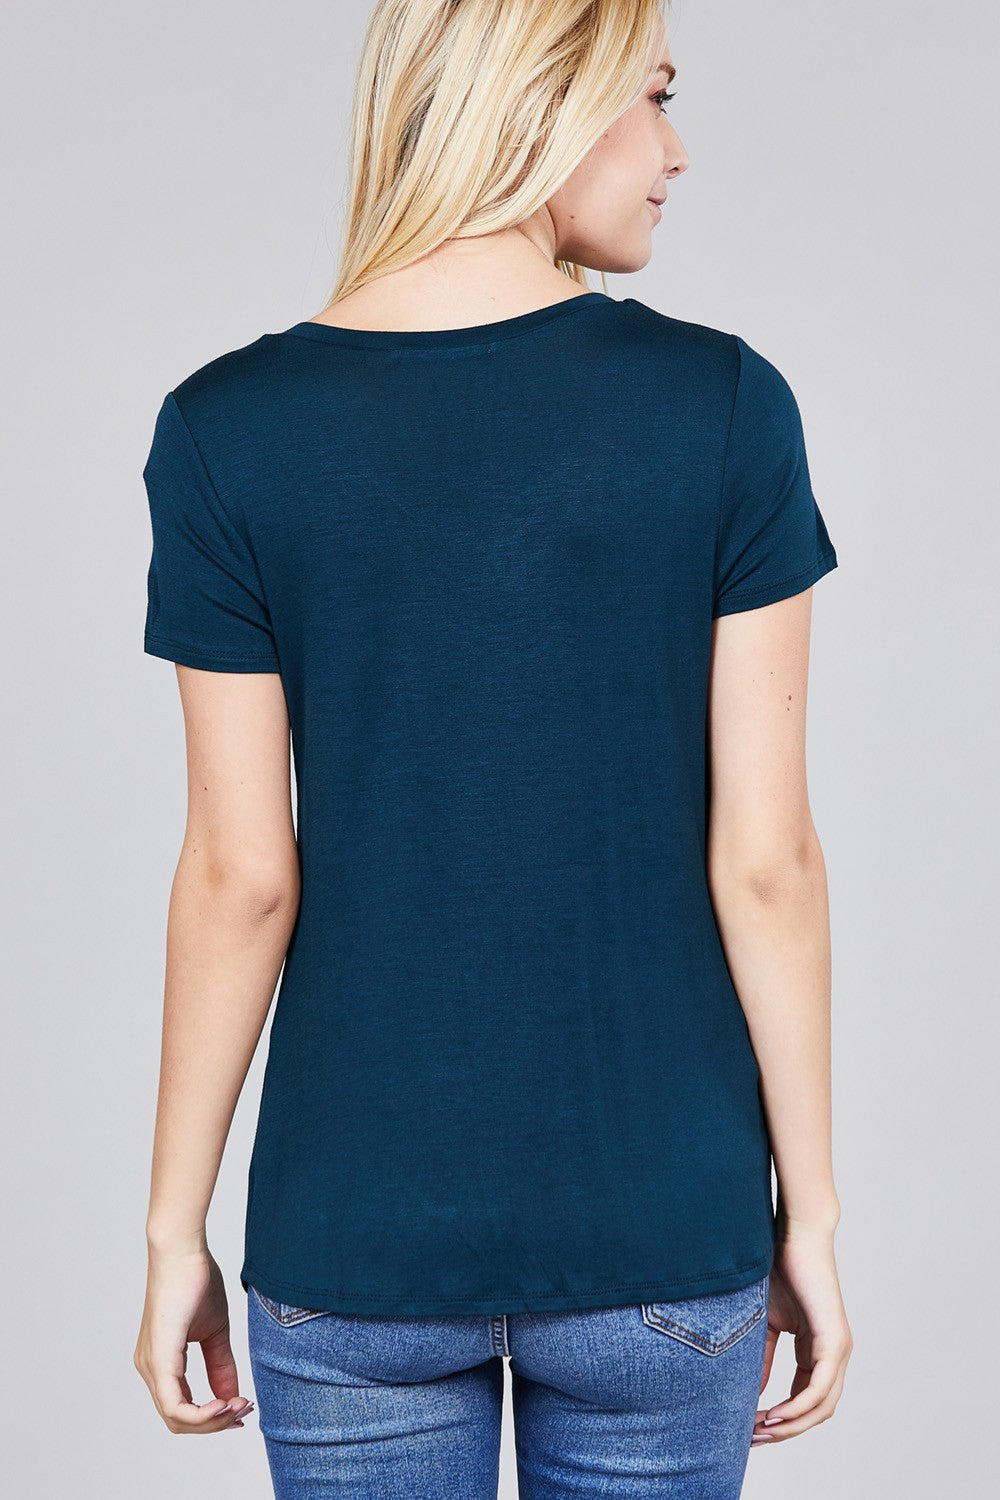 Teal V-neck Rayon Jersey Top